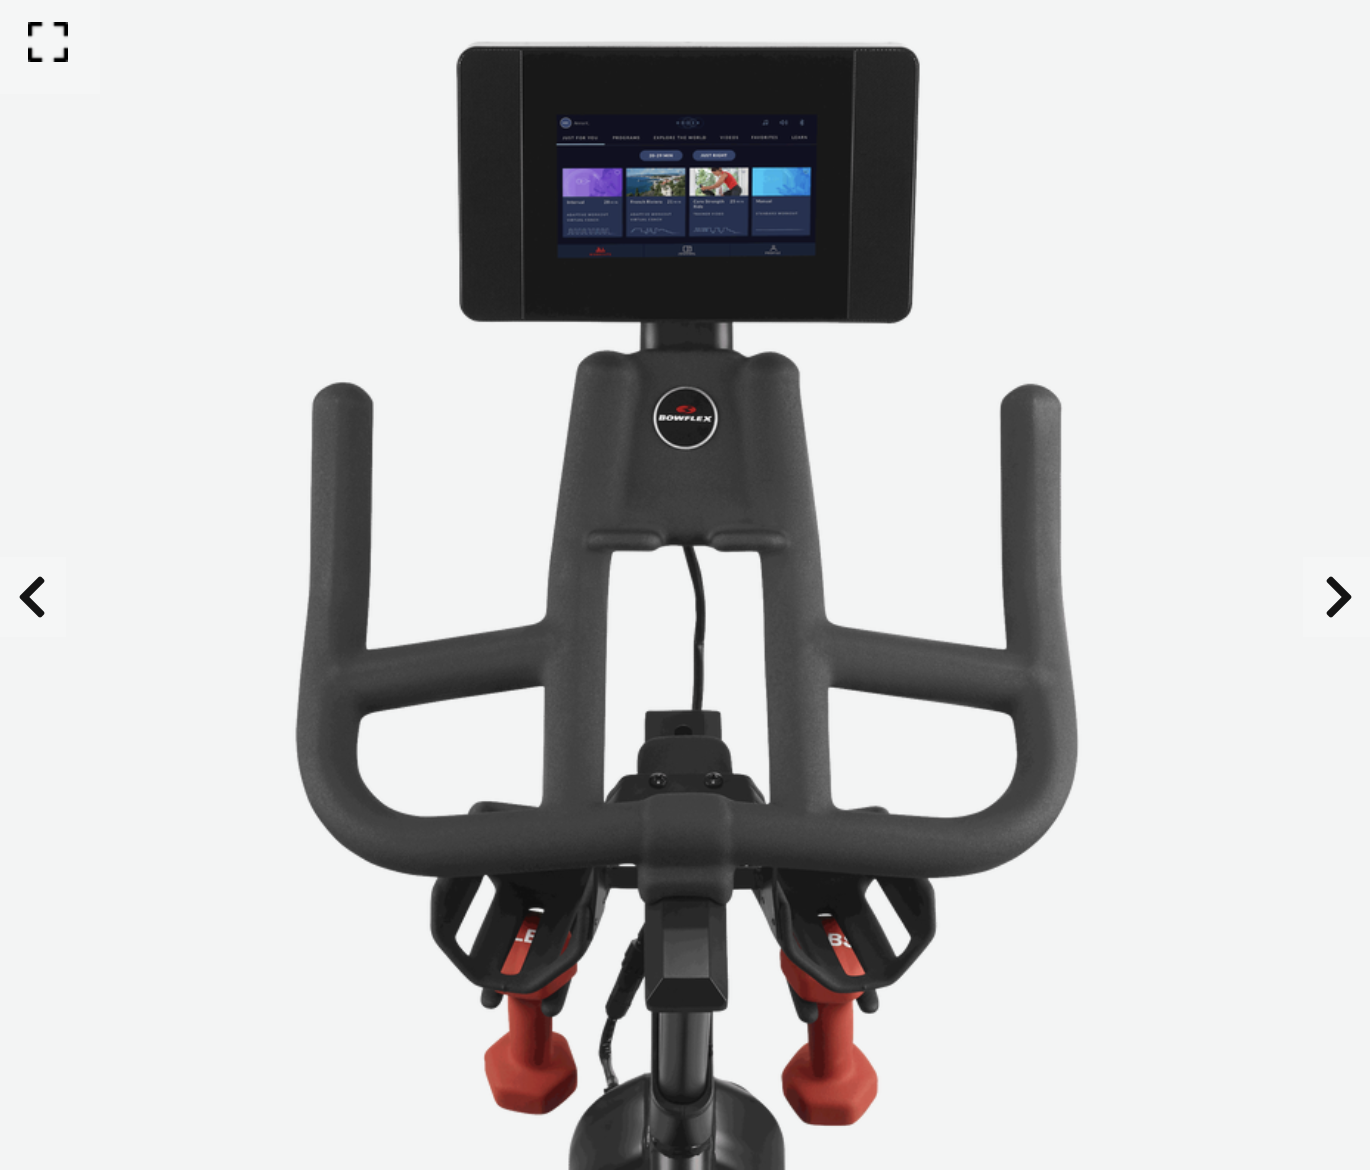 Bowflex C7 Console With Touch Screen Display